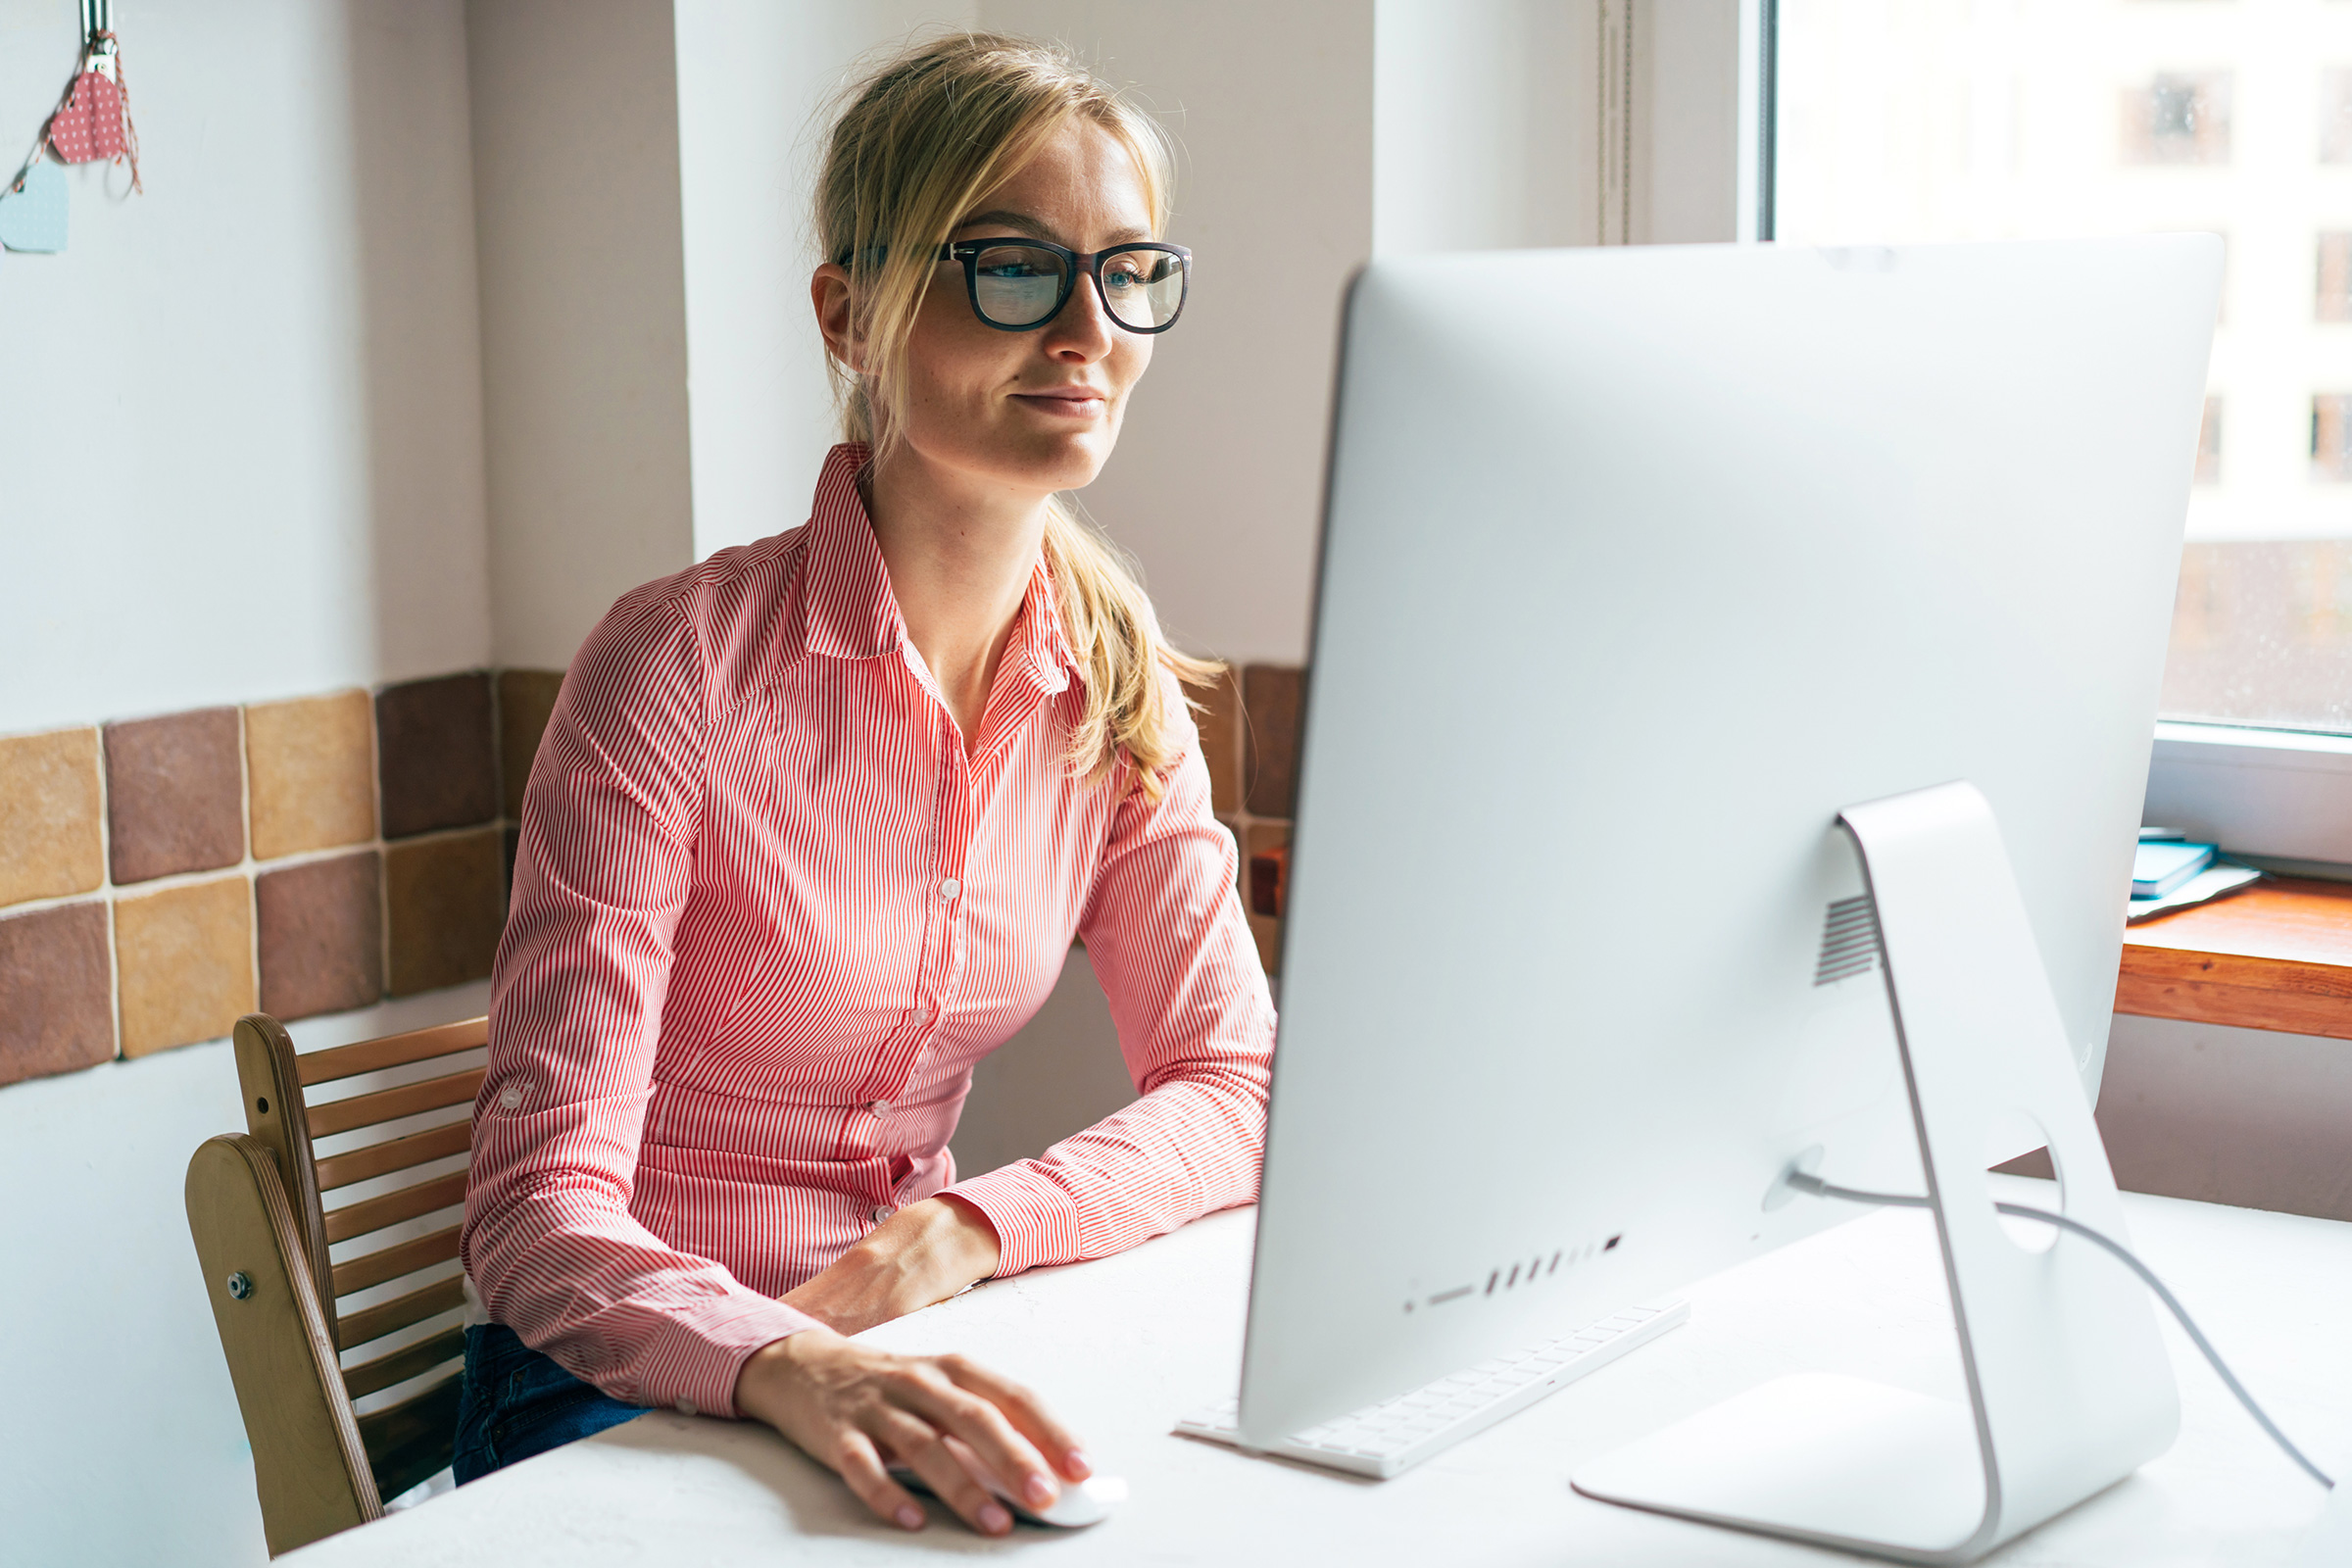 Business woman with glasses looks at computer monitor